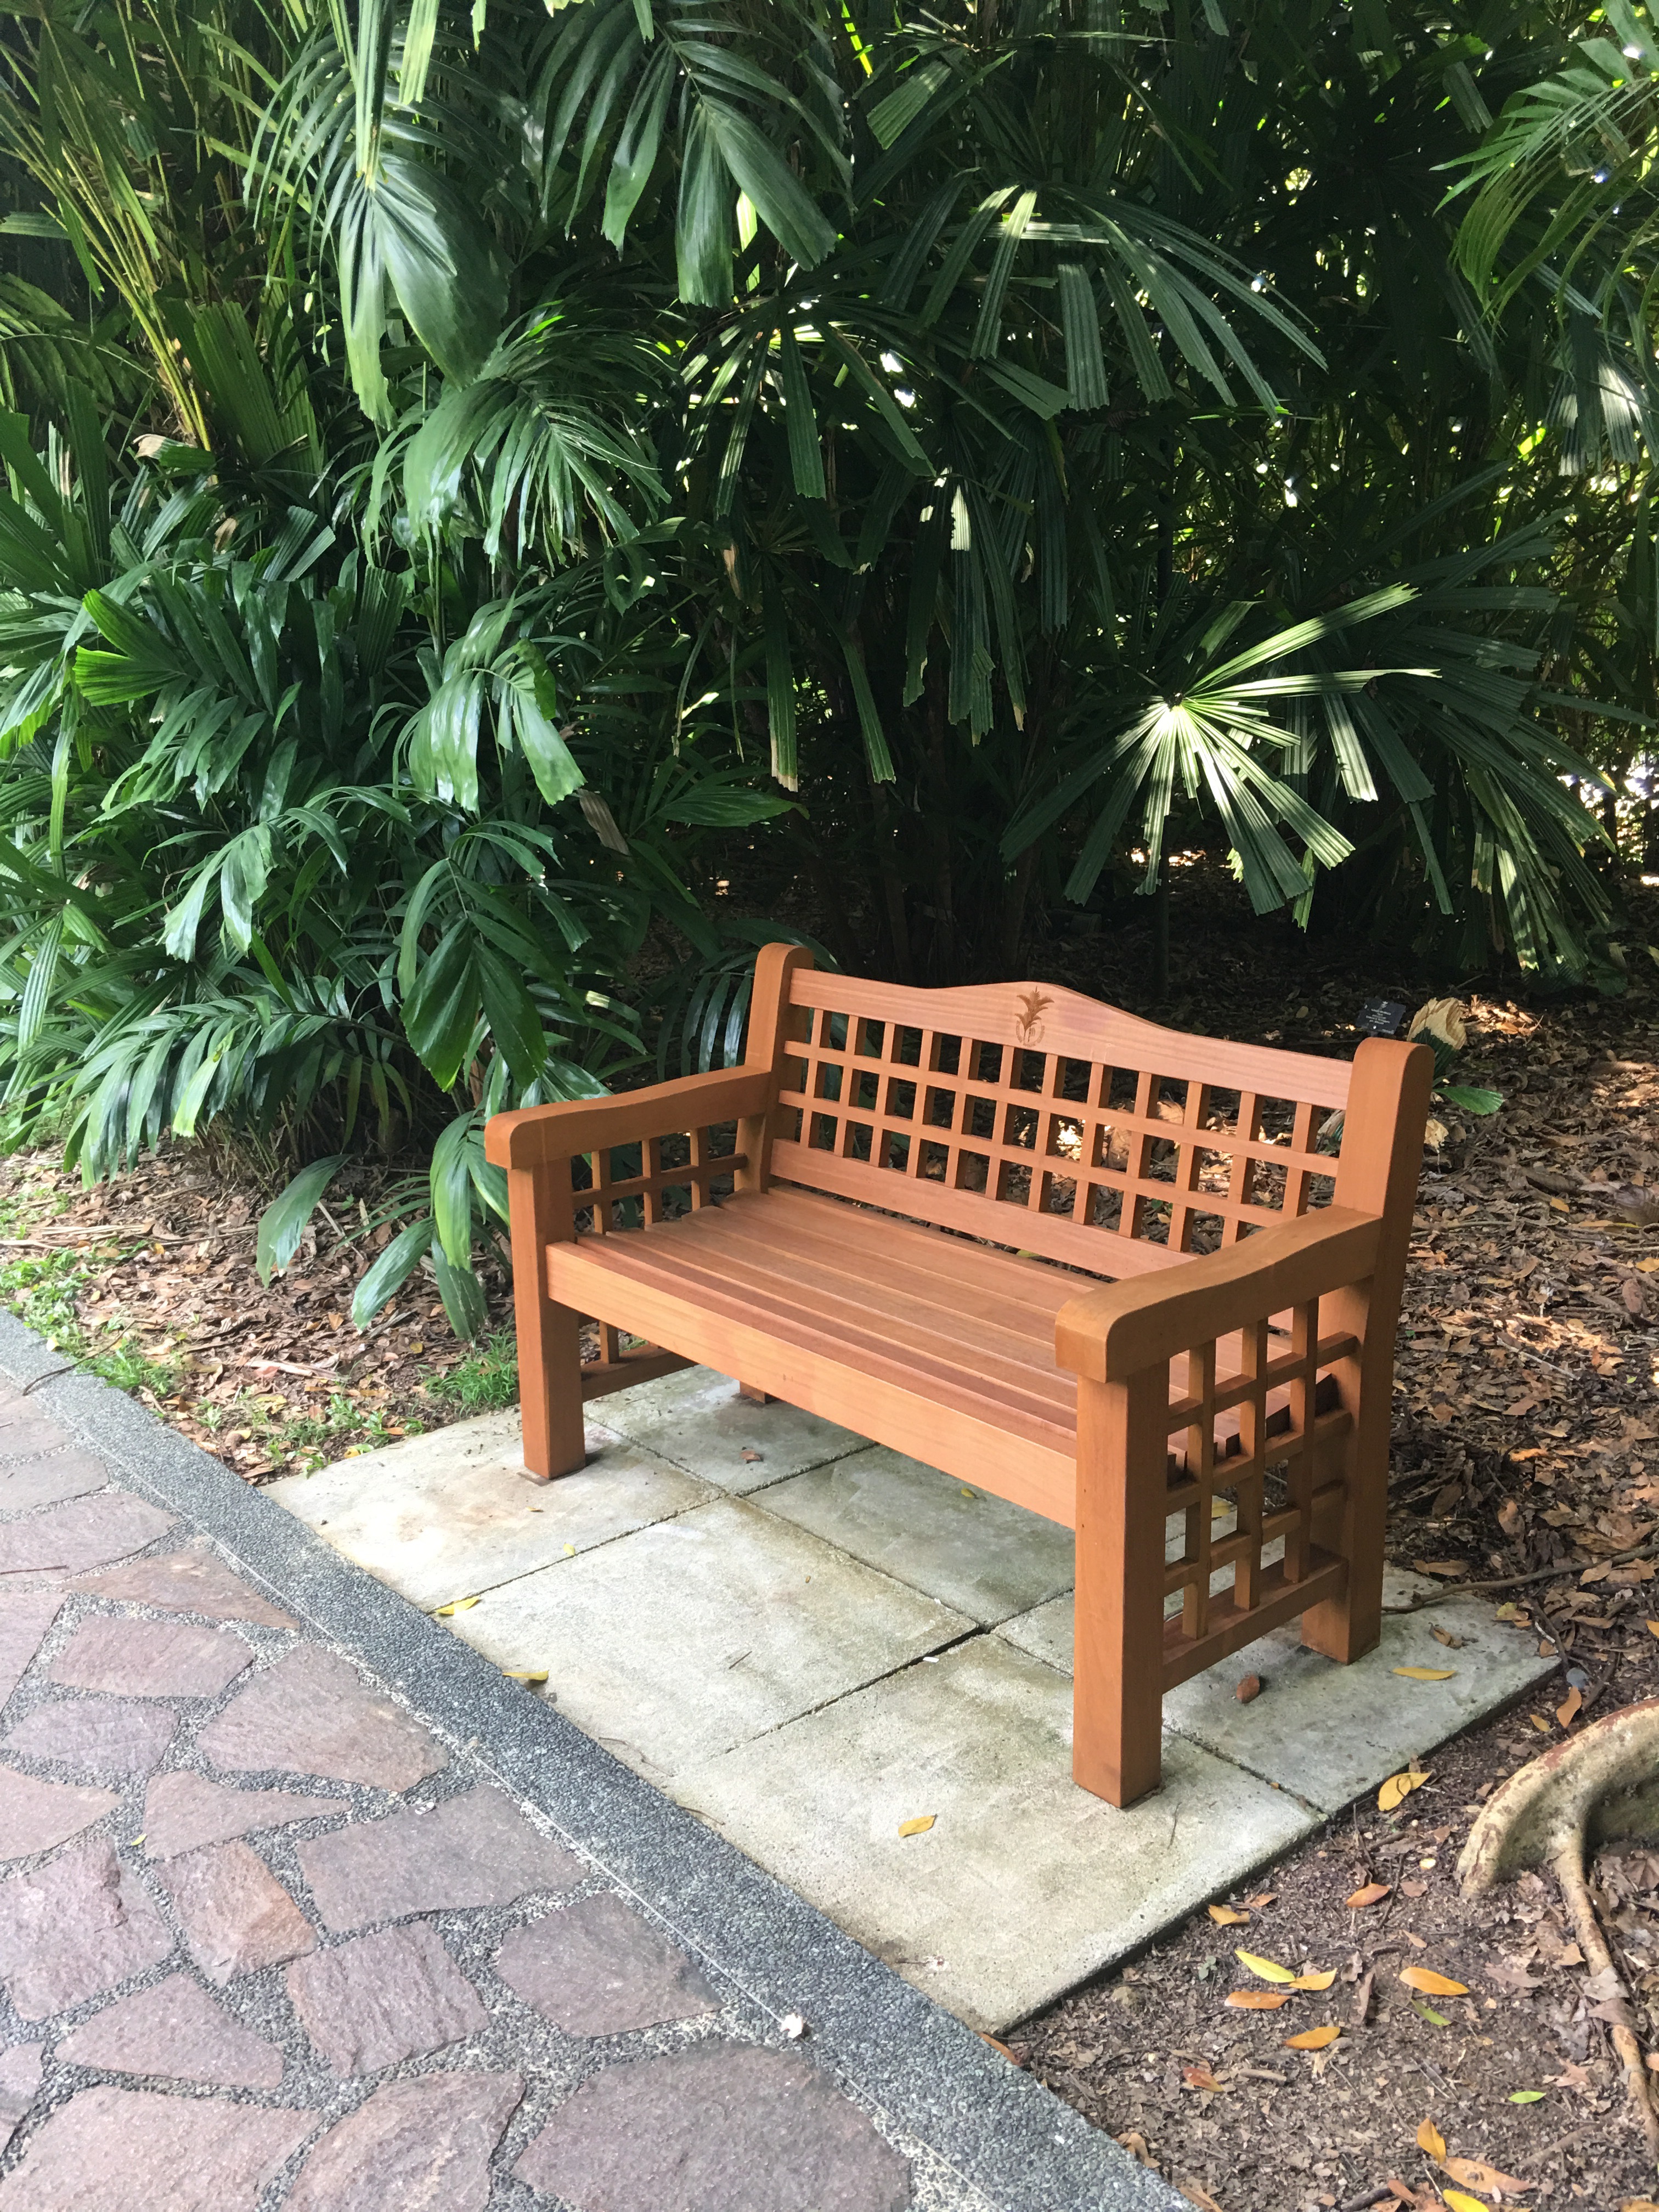 Why do benches always look new in Singapore?